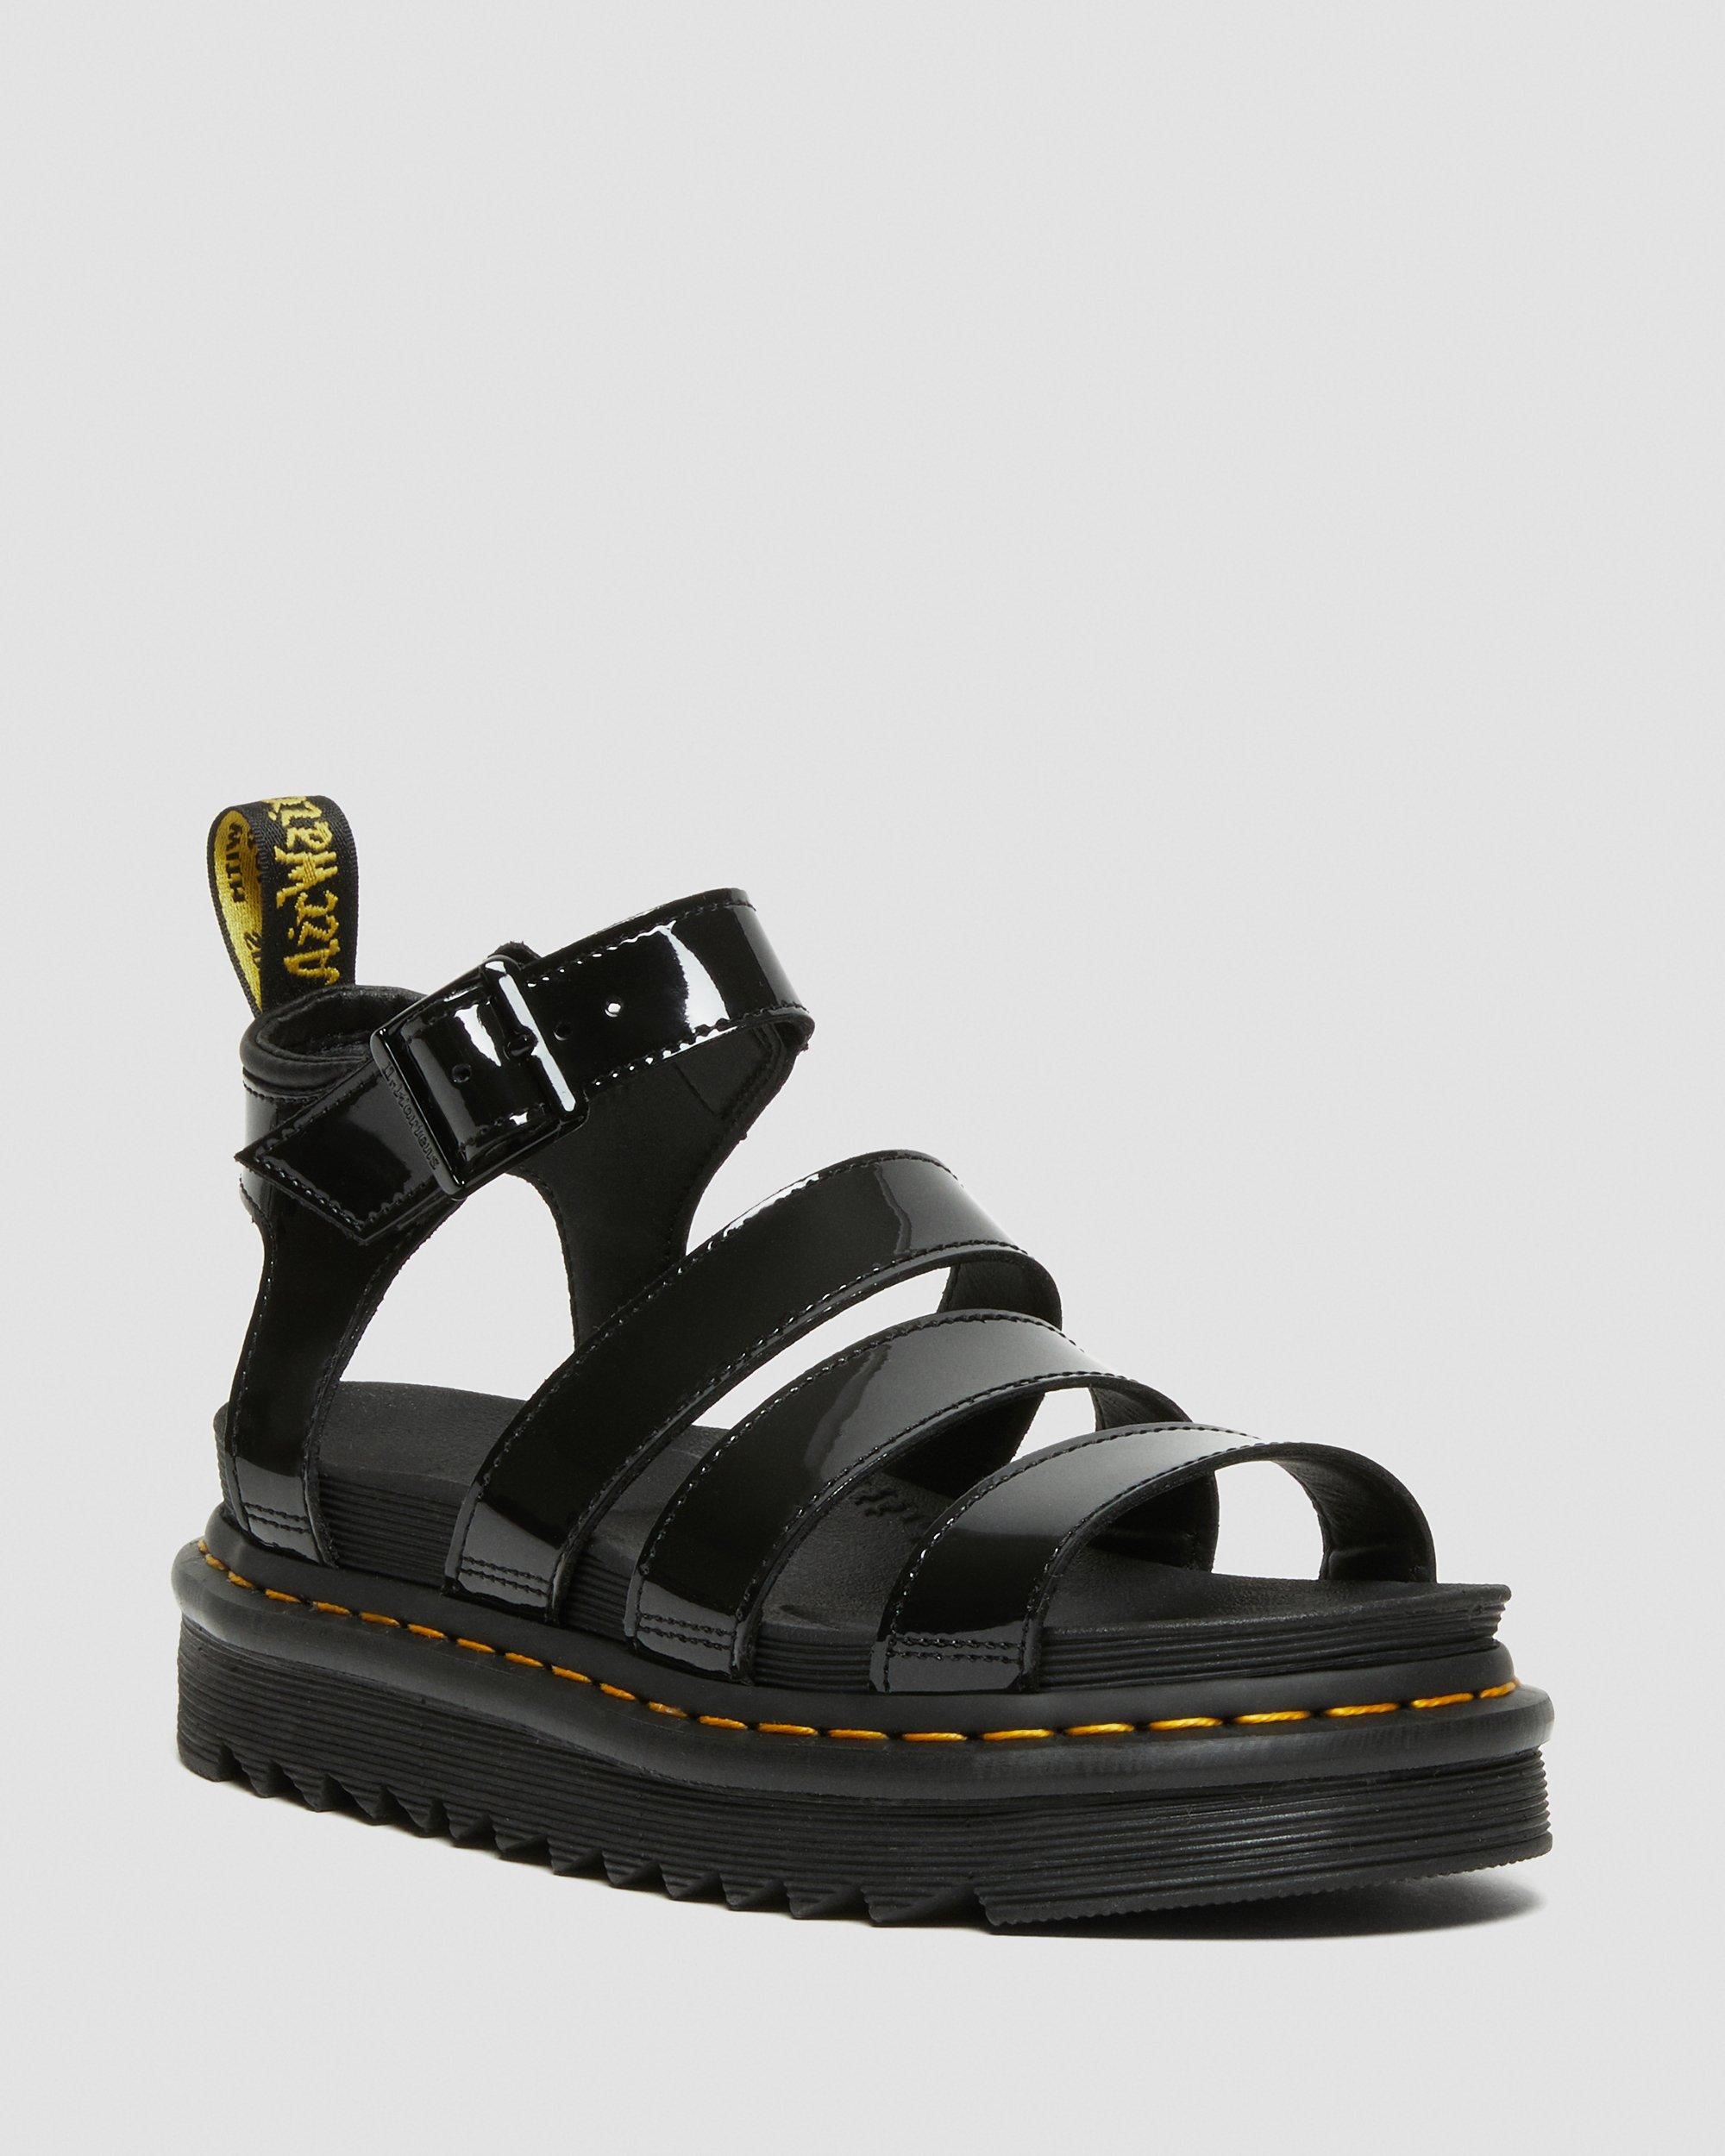 Blaire Patent Leather Gladiator Sandals